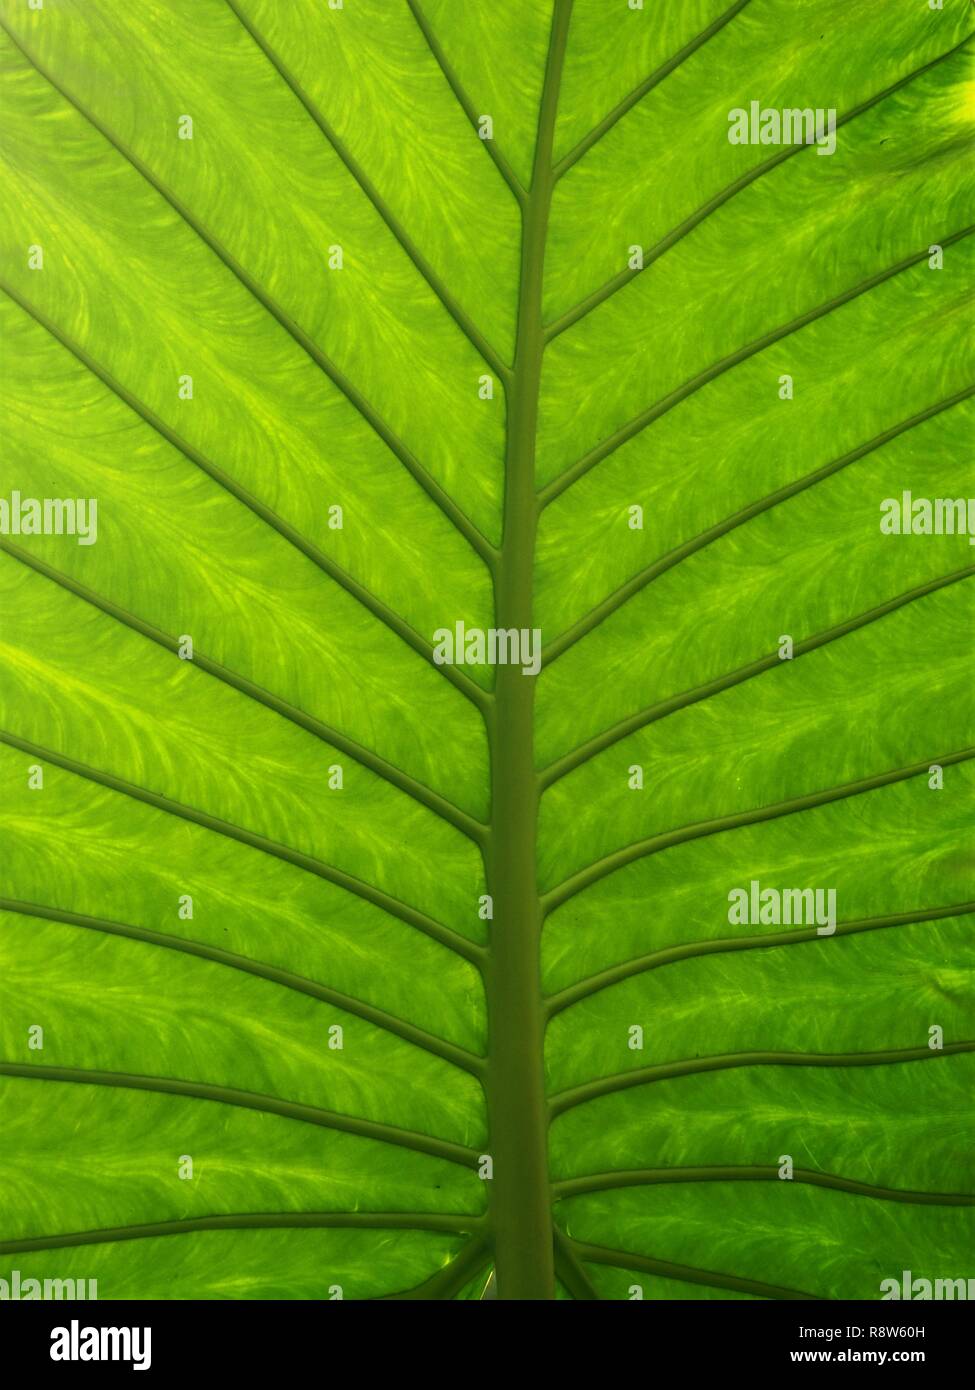 Closeup of the underside of a palm leaf showing veins and patterns Stock Photo